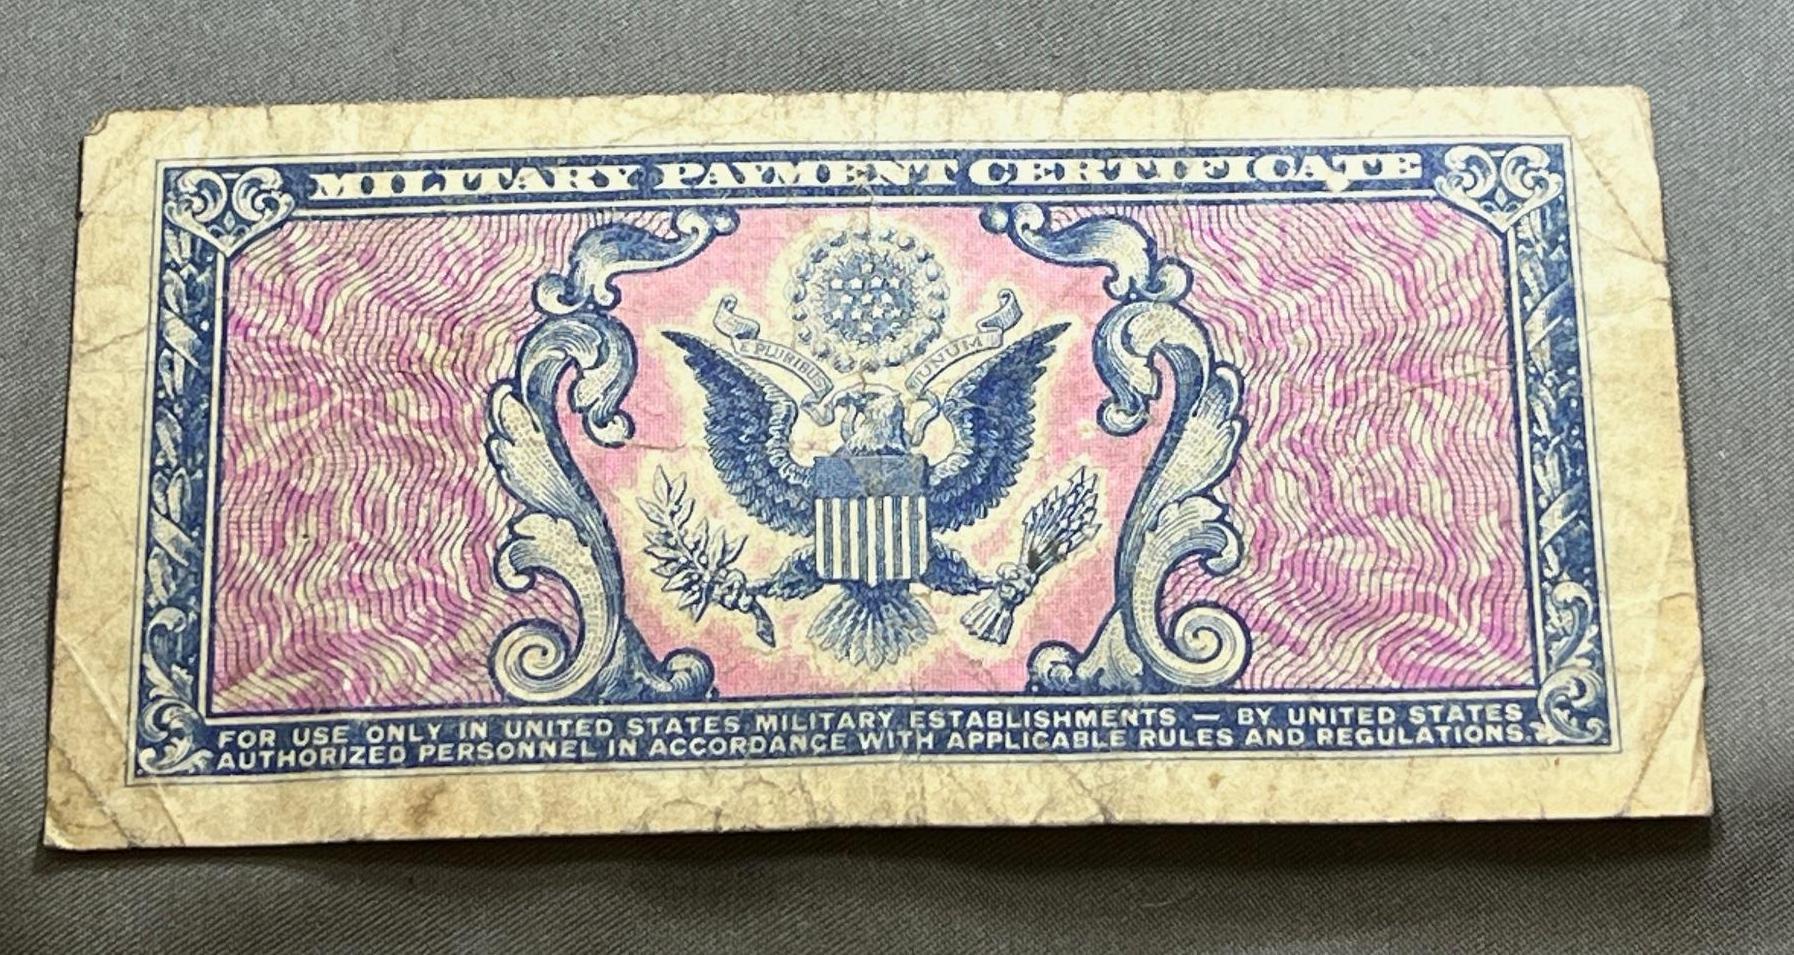 Series 481 Ten Cents Military Payment Certificate